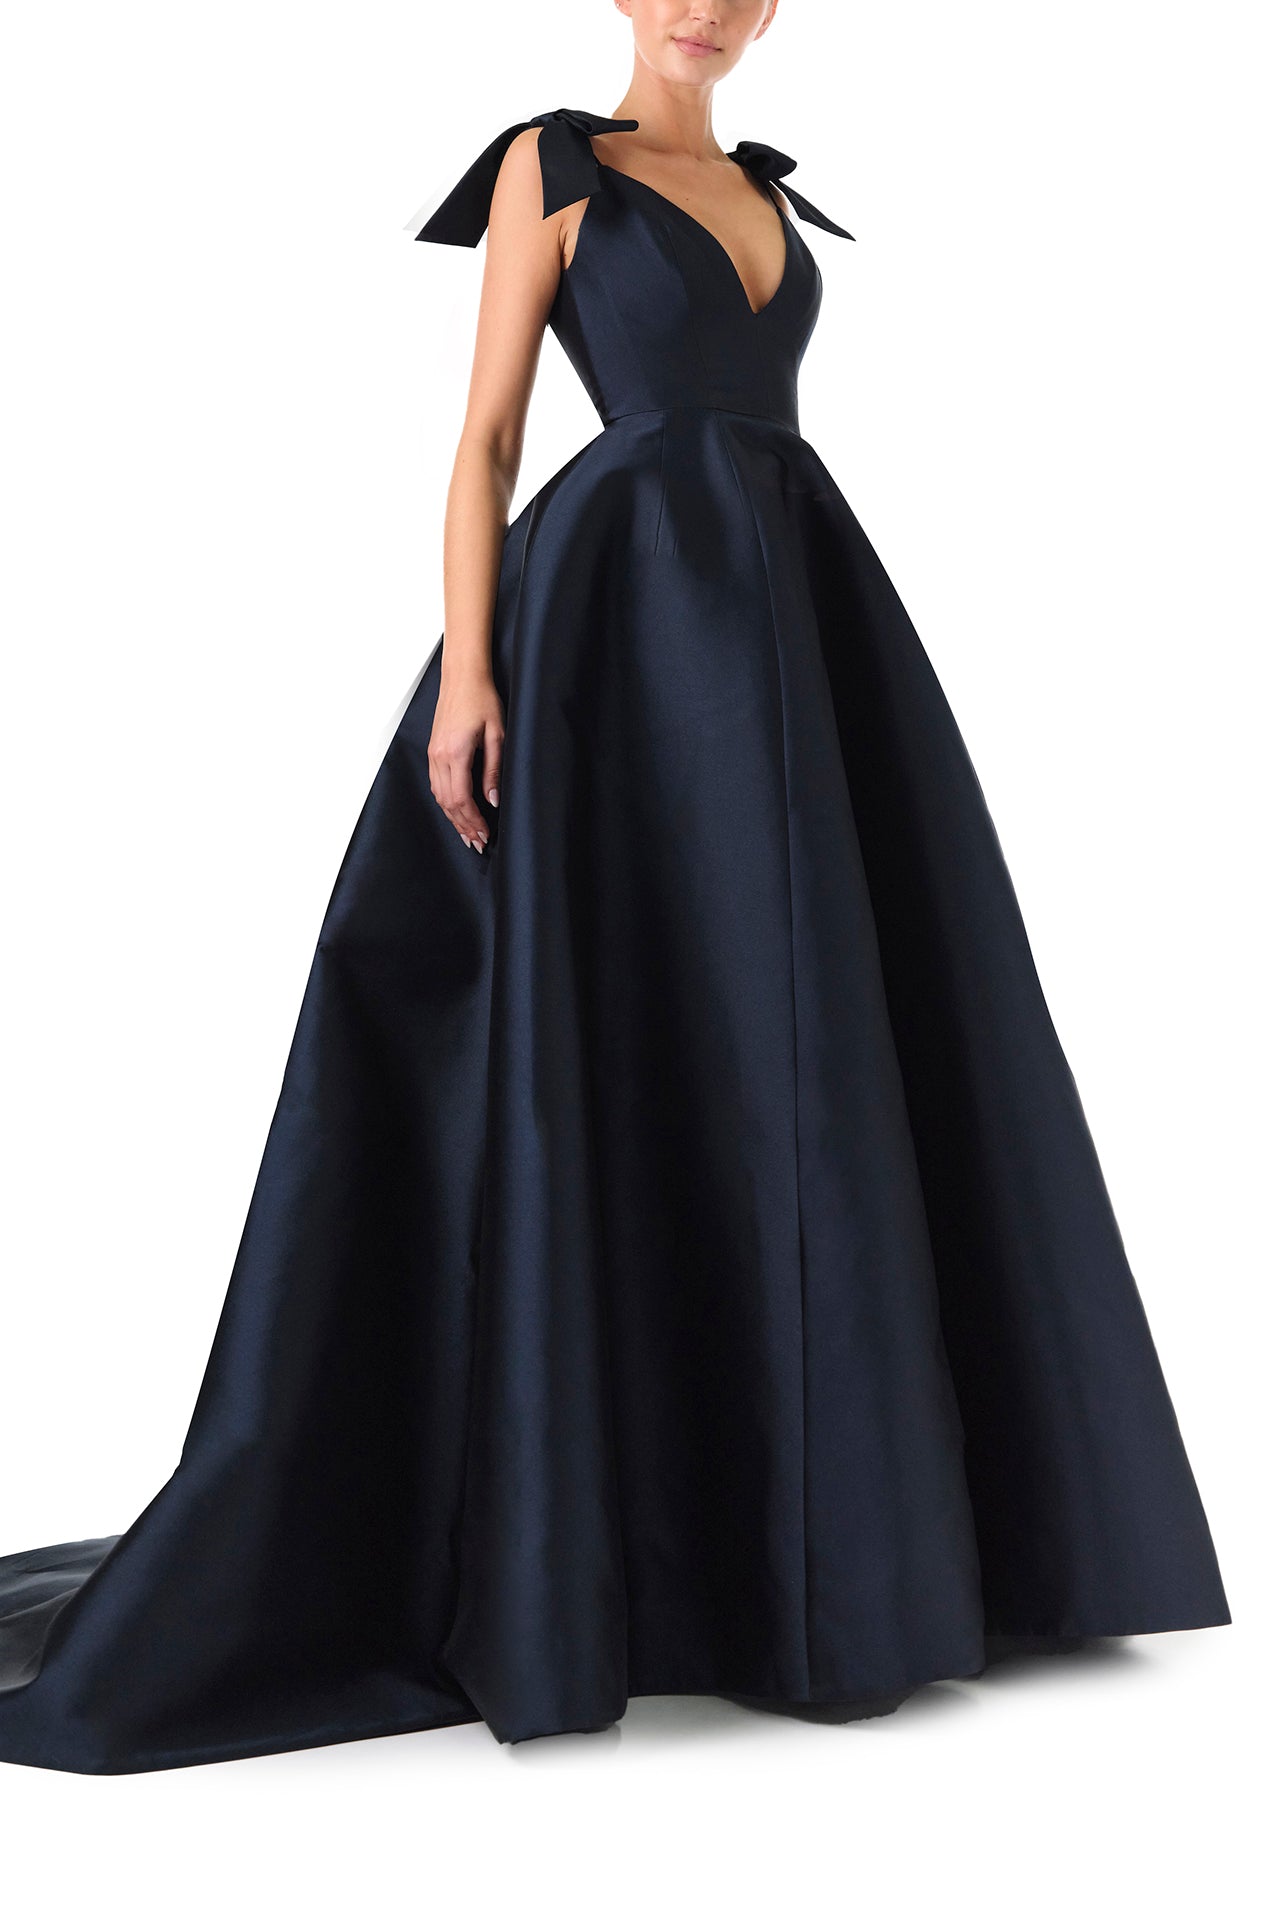 Monique Lhuillier Fall 2024 deep V-neck ball gown in navy mikado with full skirt and bow detail at shoulders - right side,